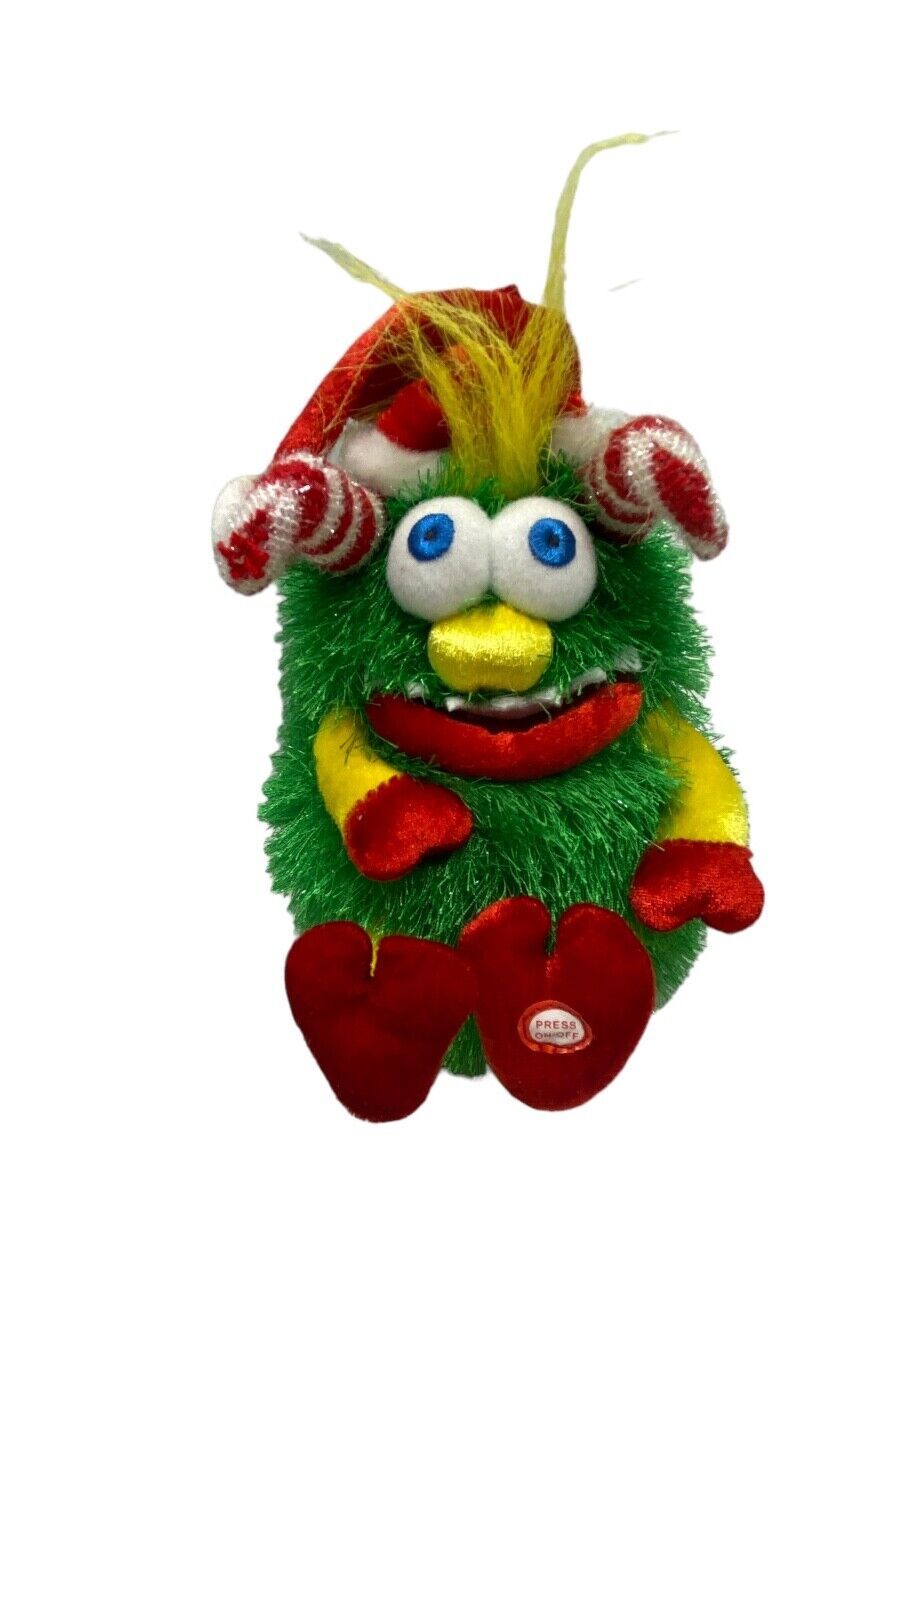 Gemmy Merry Monster Green Dancing Christmas Tree Singing Dancing Silly Toy works - $39.59